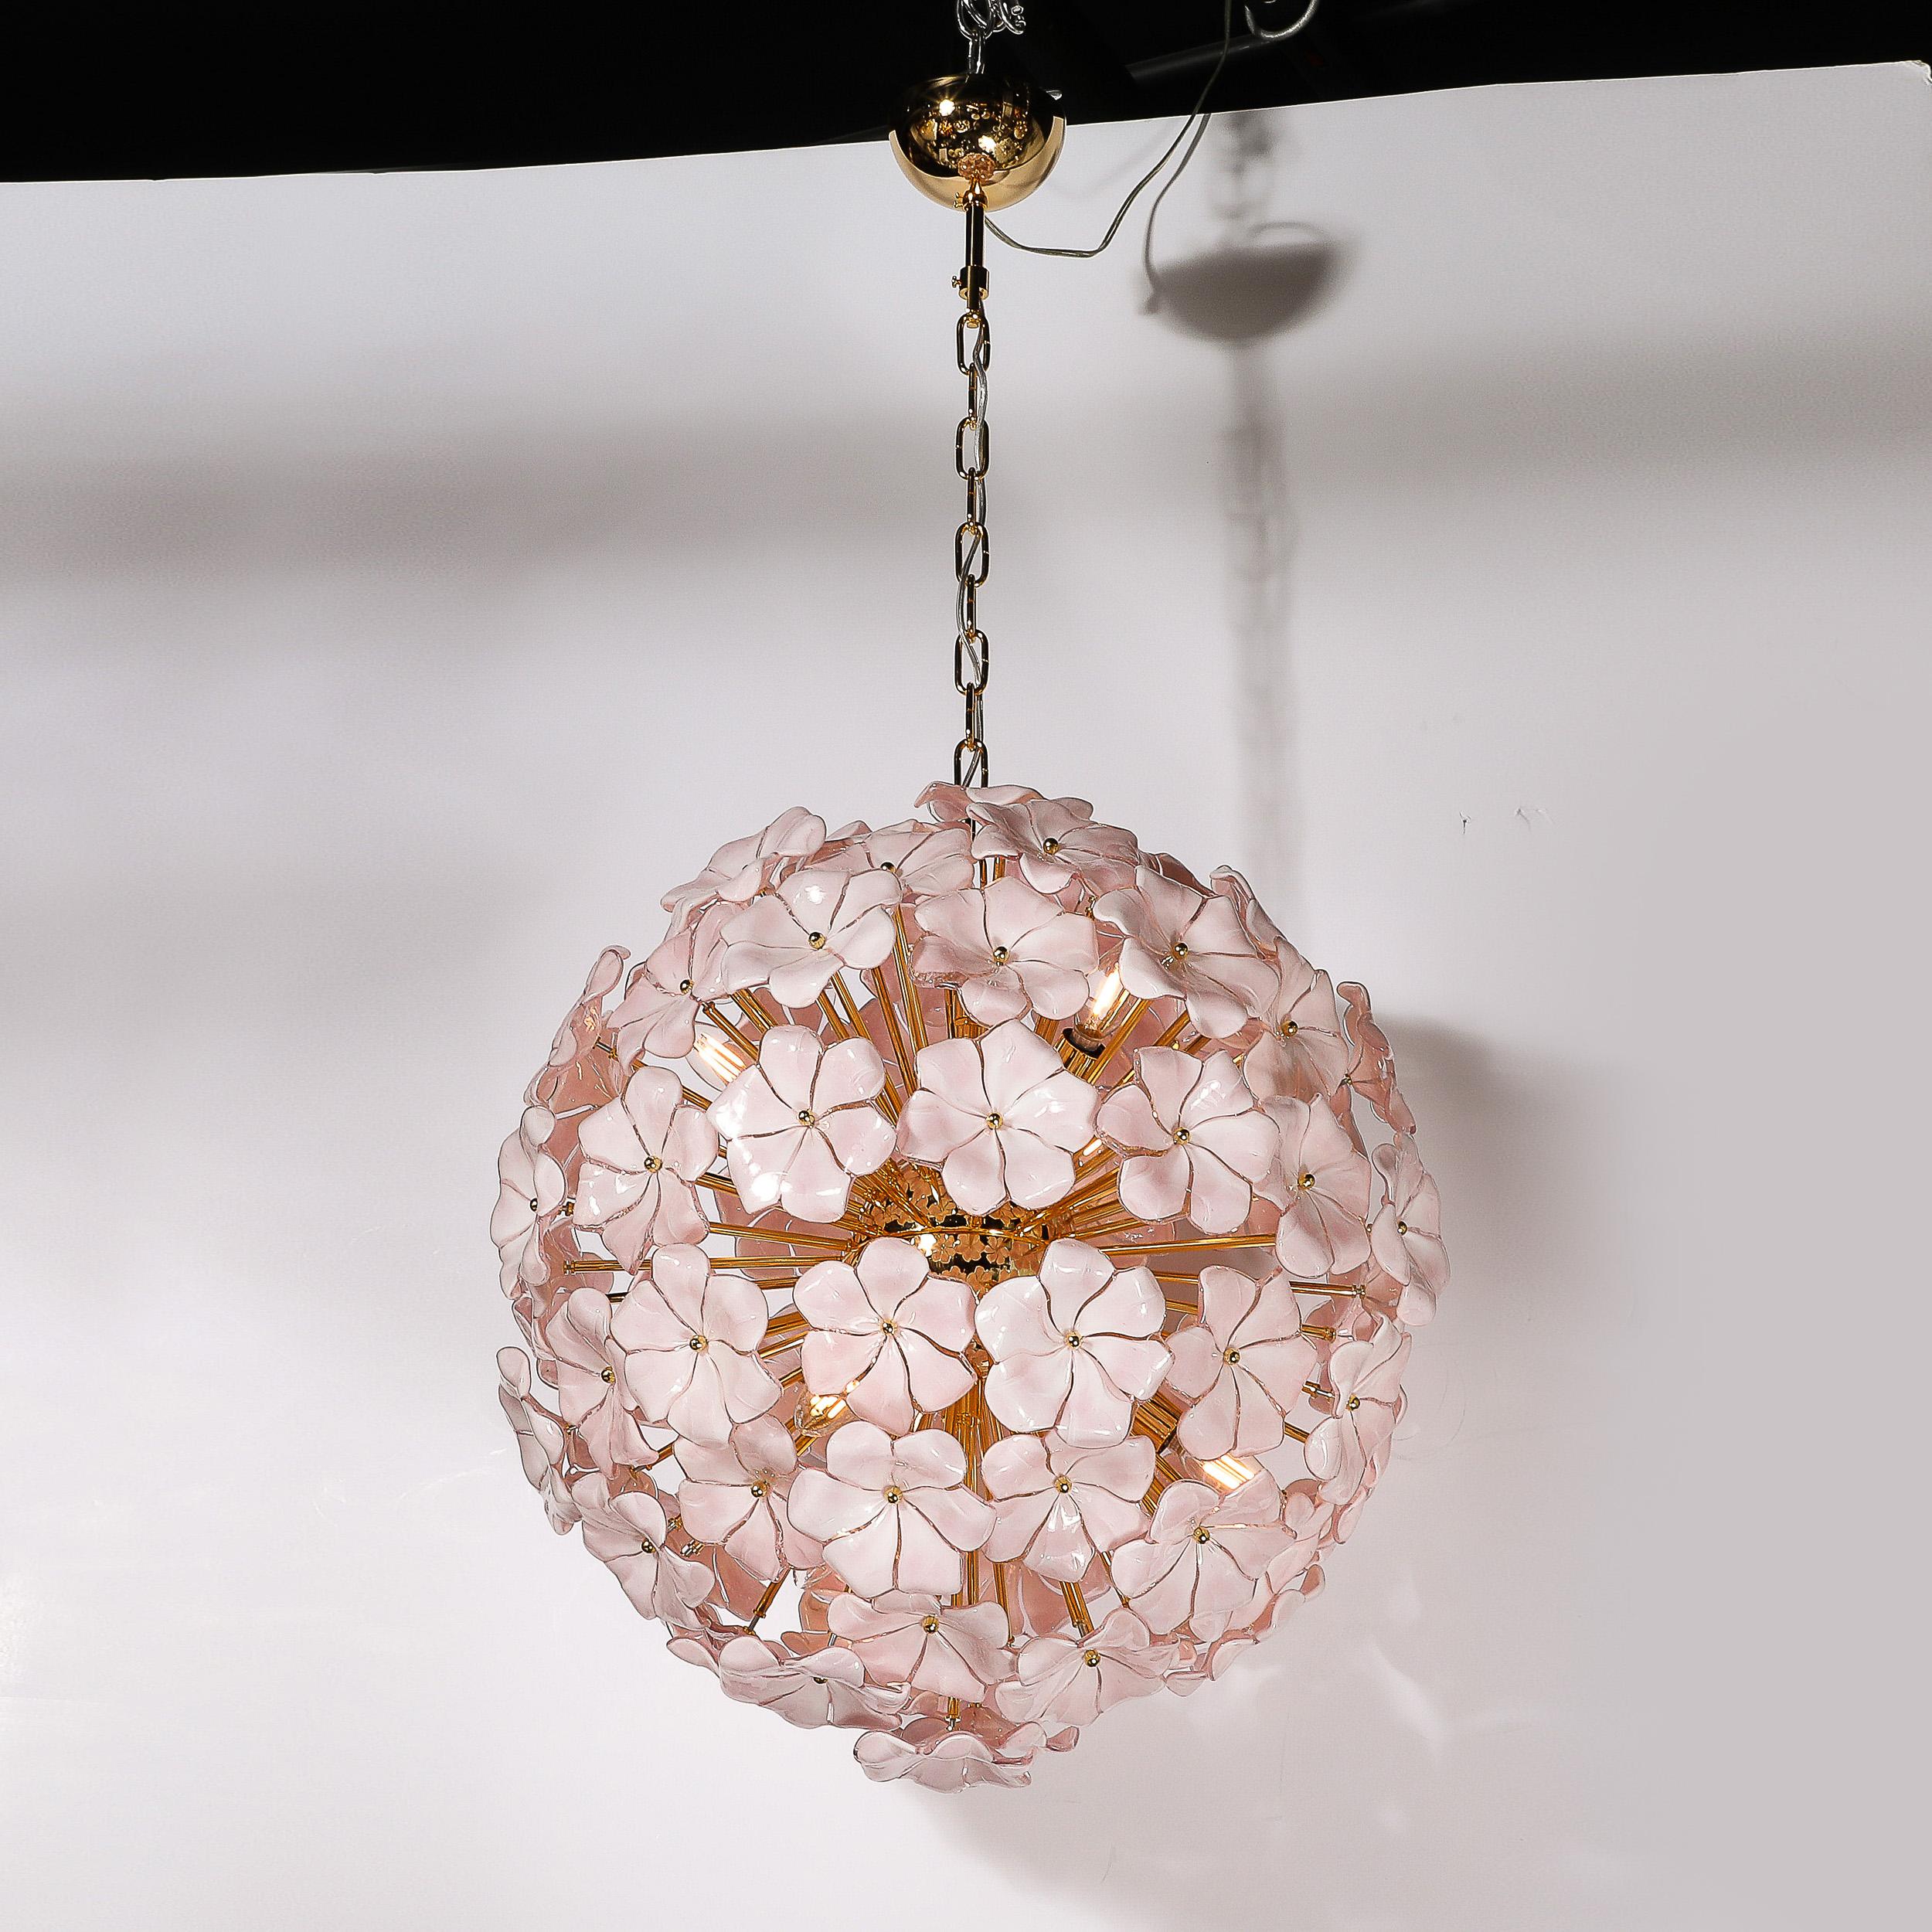 Modernist Hand-Blown Murano Glass Sakura Pink Floral Chandelier & Brass Fittings In New Condition For Sale In New York, NY